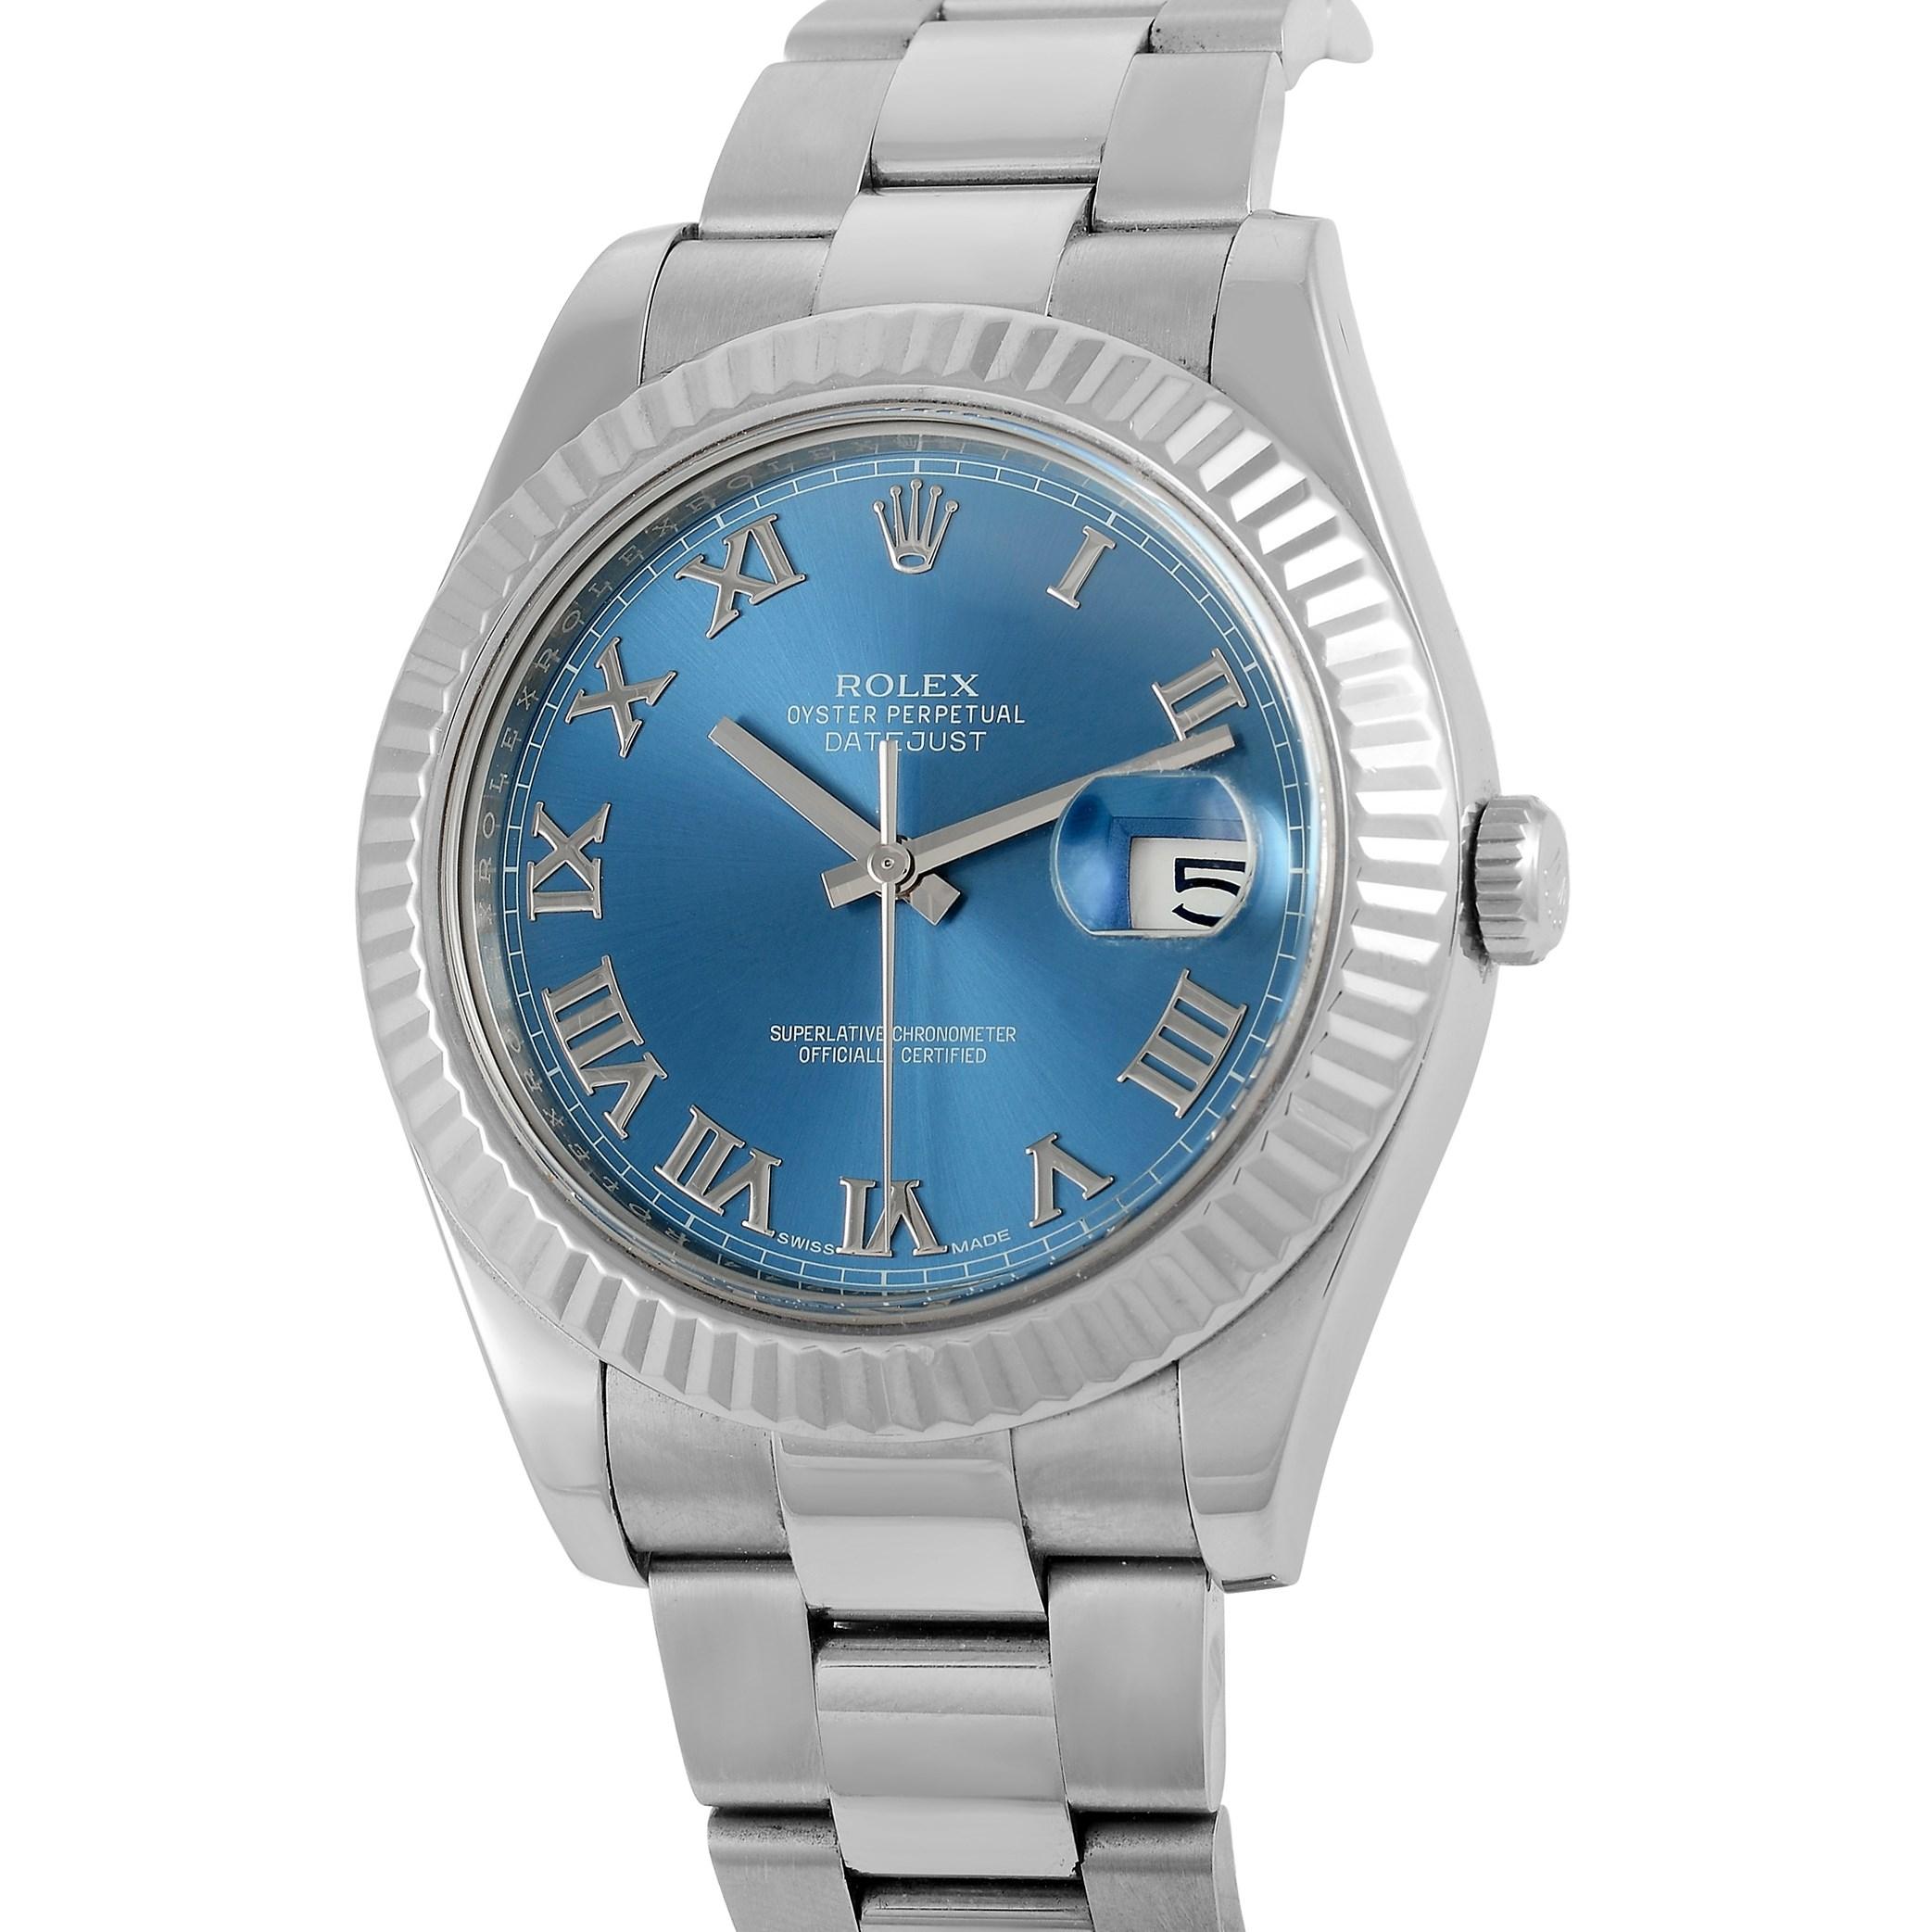 This Rolex Oyster Perpetual Datejust II 41 mm Watch, reference number 116334, features a white oystersteel case with fluted bezel measuring 41 mm in diameter. It is presented on a matching white oystersteel bracelet with a deployment clasp. The